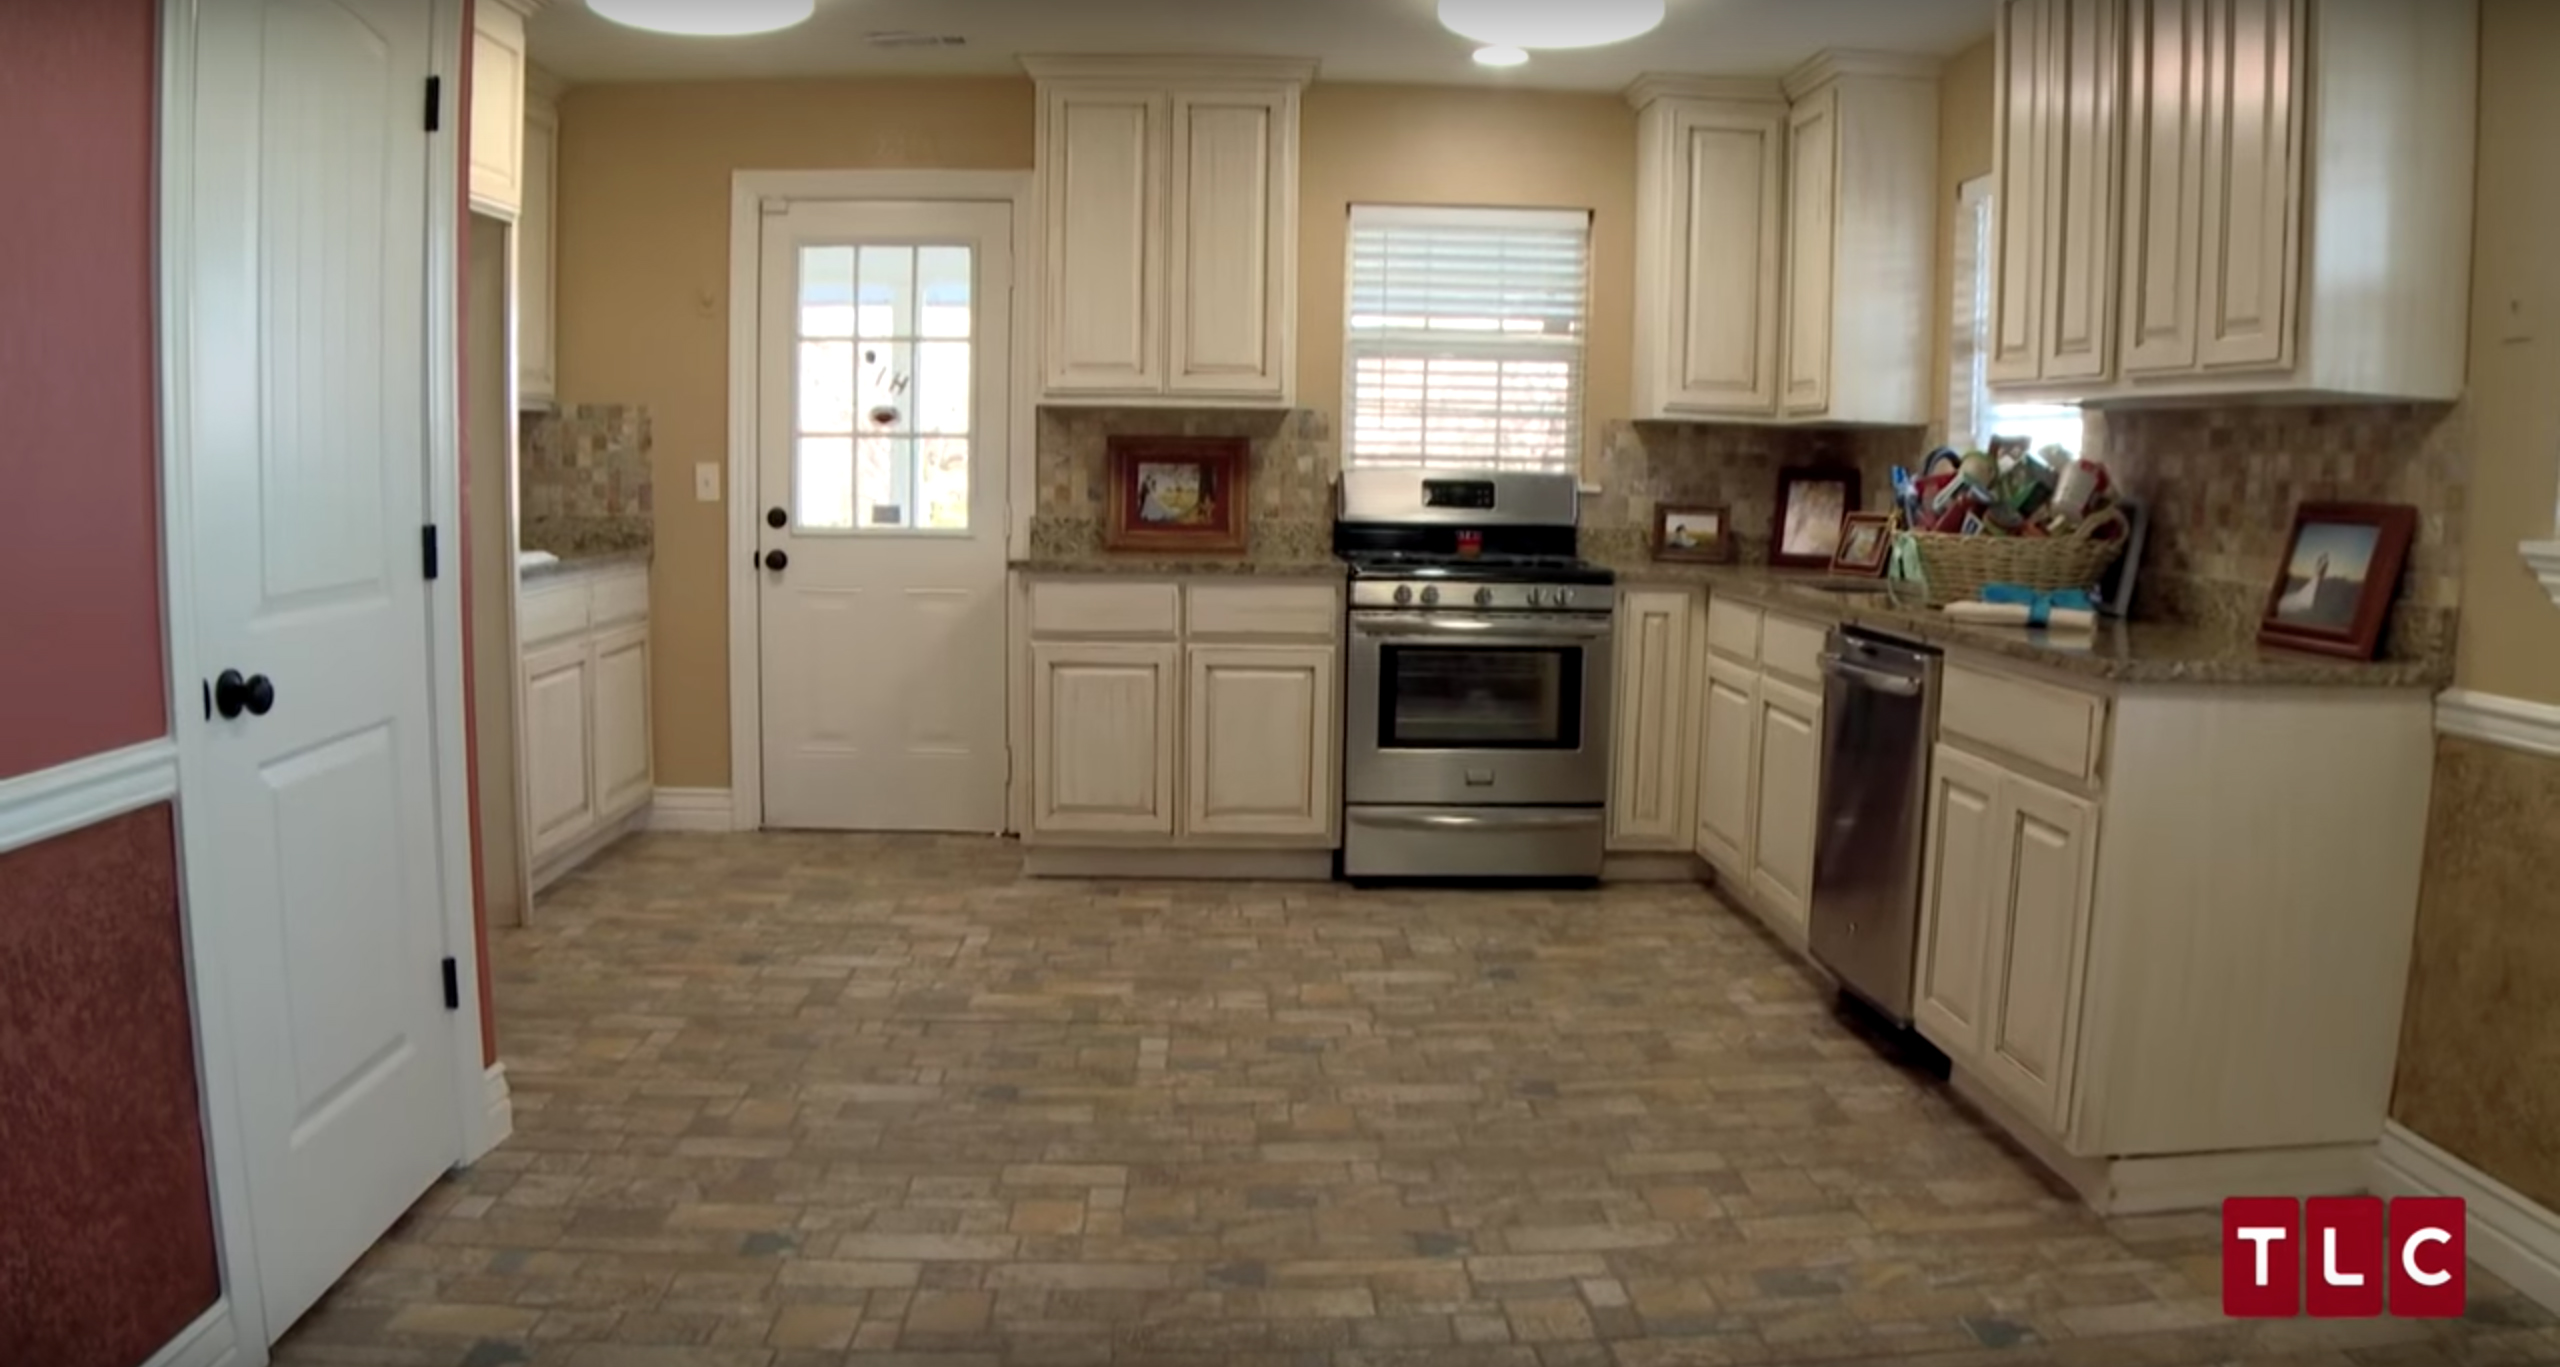 Duggar Home Makeovers Before And After Pics Of Their Renovations 